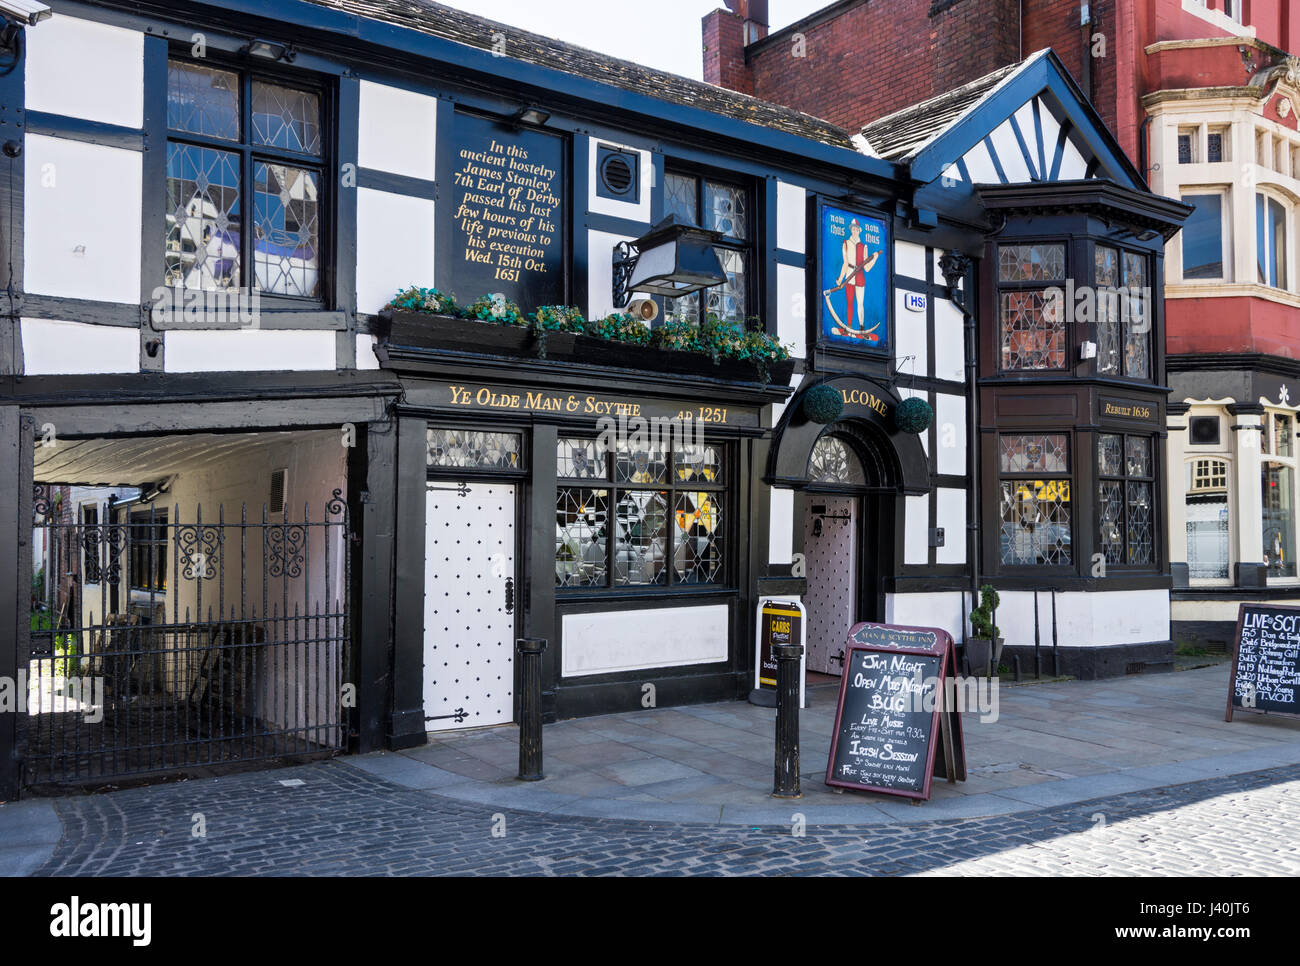 Ye Olde Man & Scythe pub, Bolton, Manchester, England, UK.  The oldest pub in Bolton and one of the ten oldest in the UK. Stock Photo